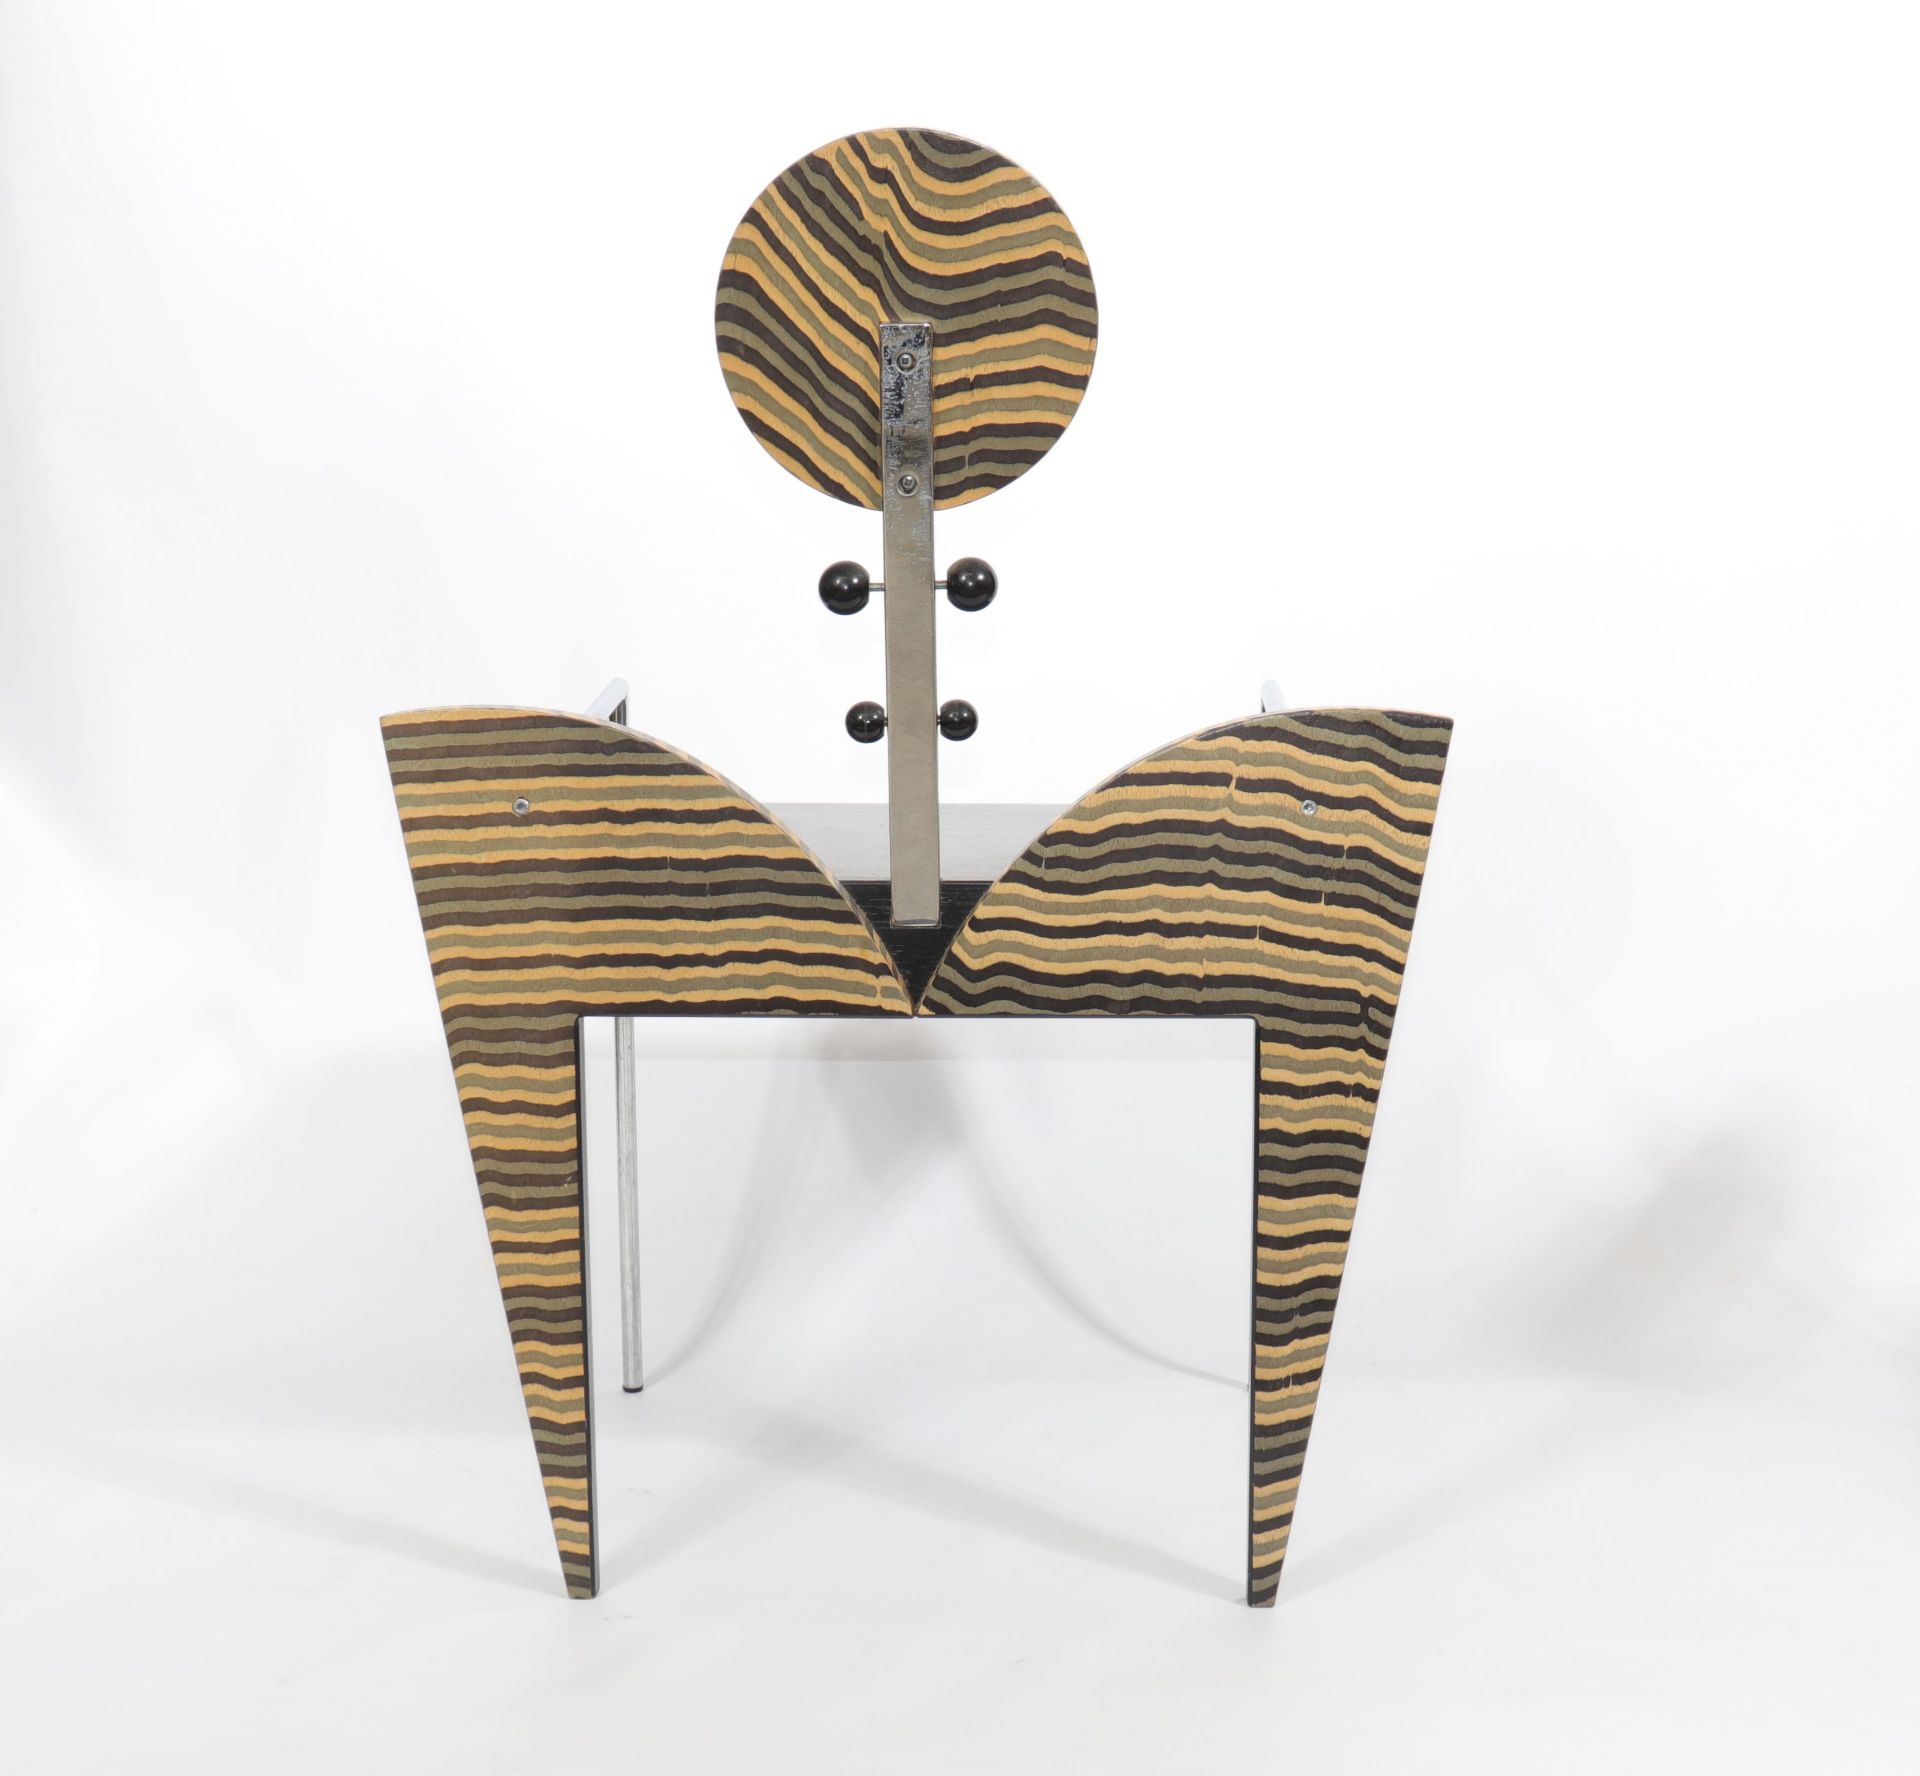 Chairs (2) Design Axel Hutter Grenzformen Raumconcept - Image 4 of 8